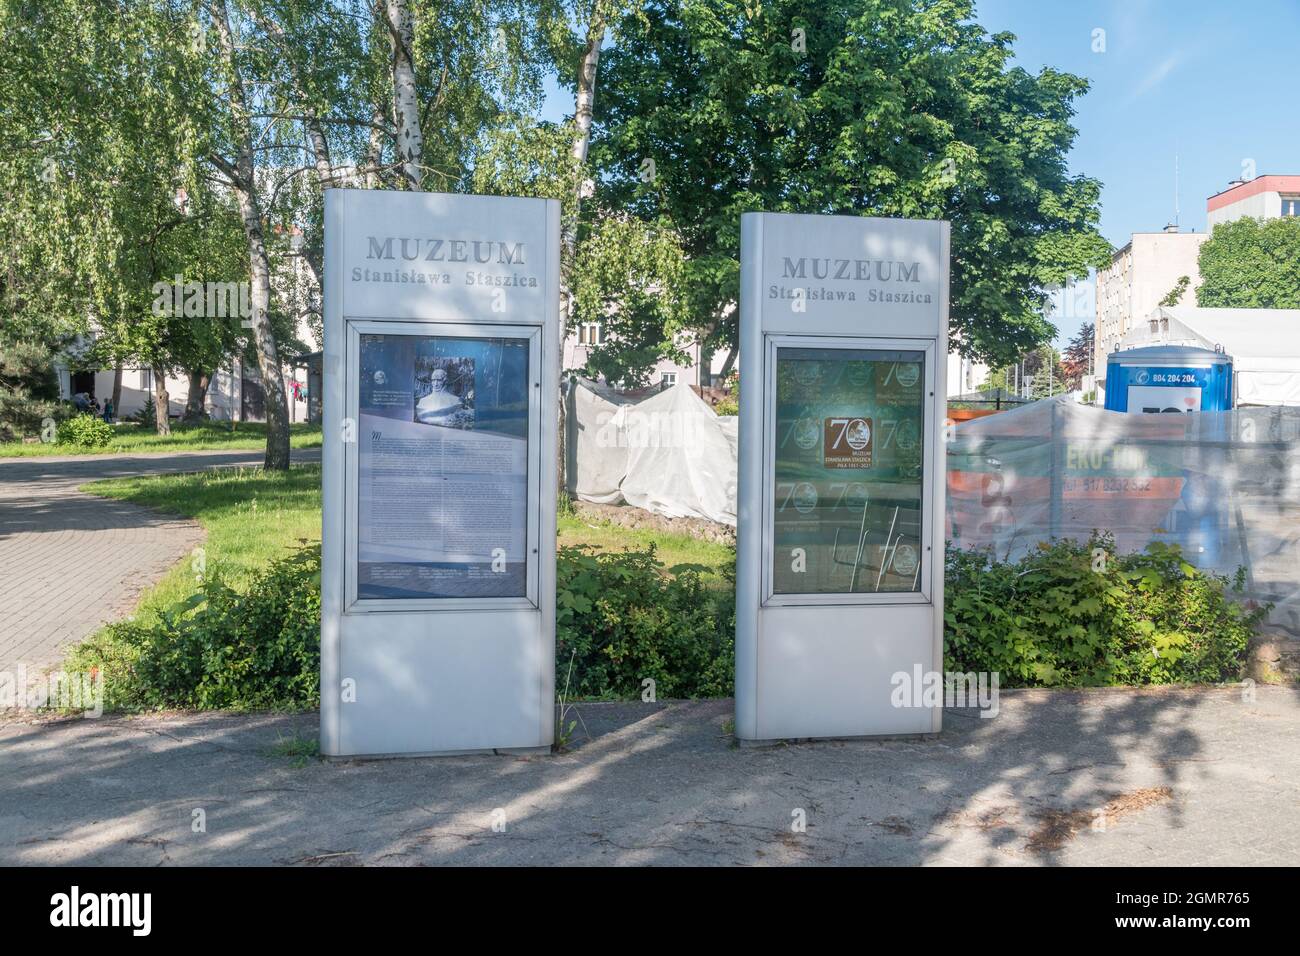 Pila, Poland - May 31, 2021: Sign board at Stanislaw Staszic Museum. Stock Photo